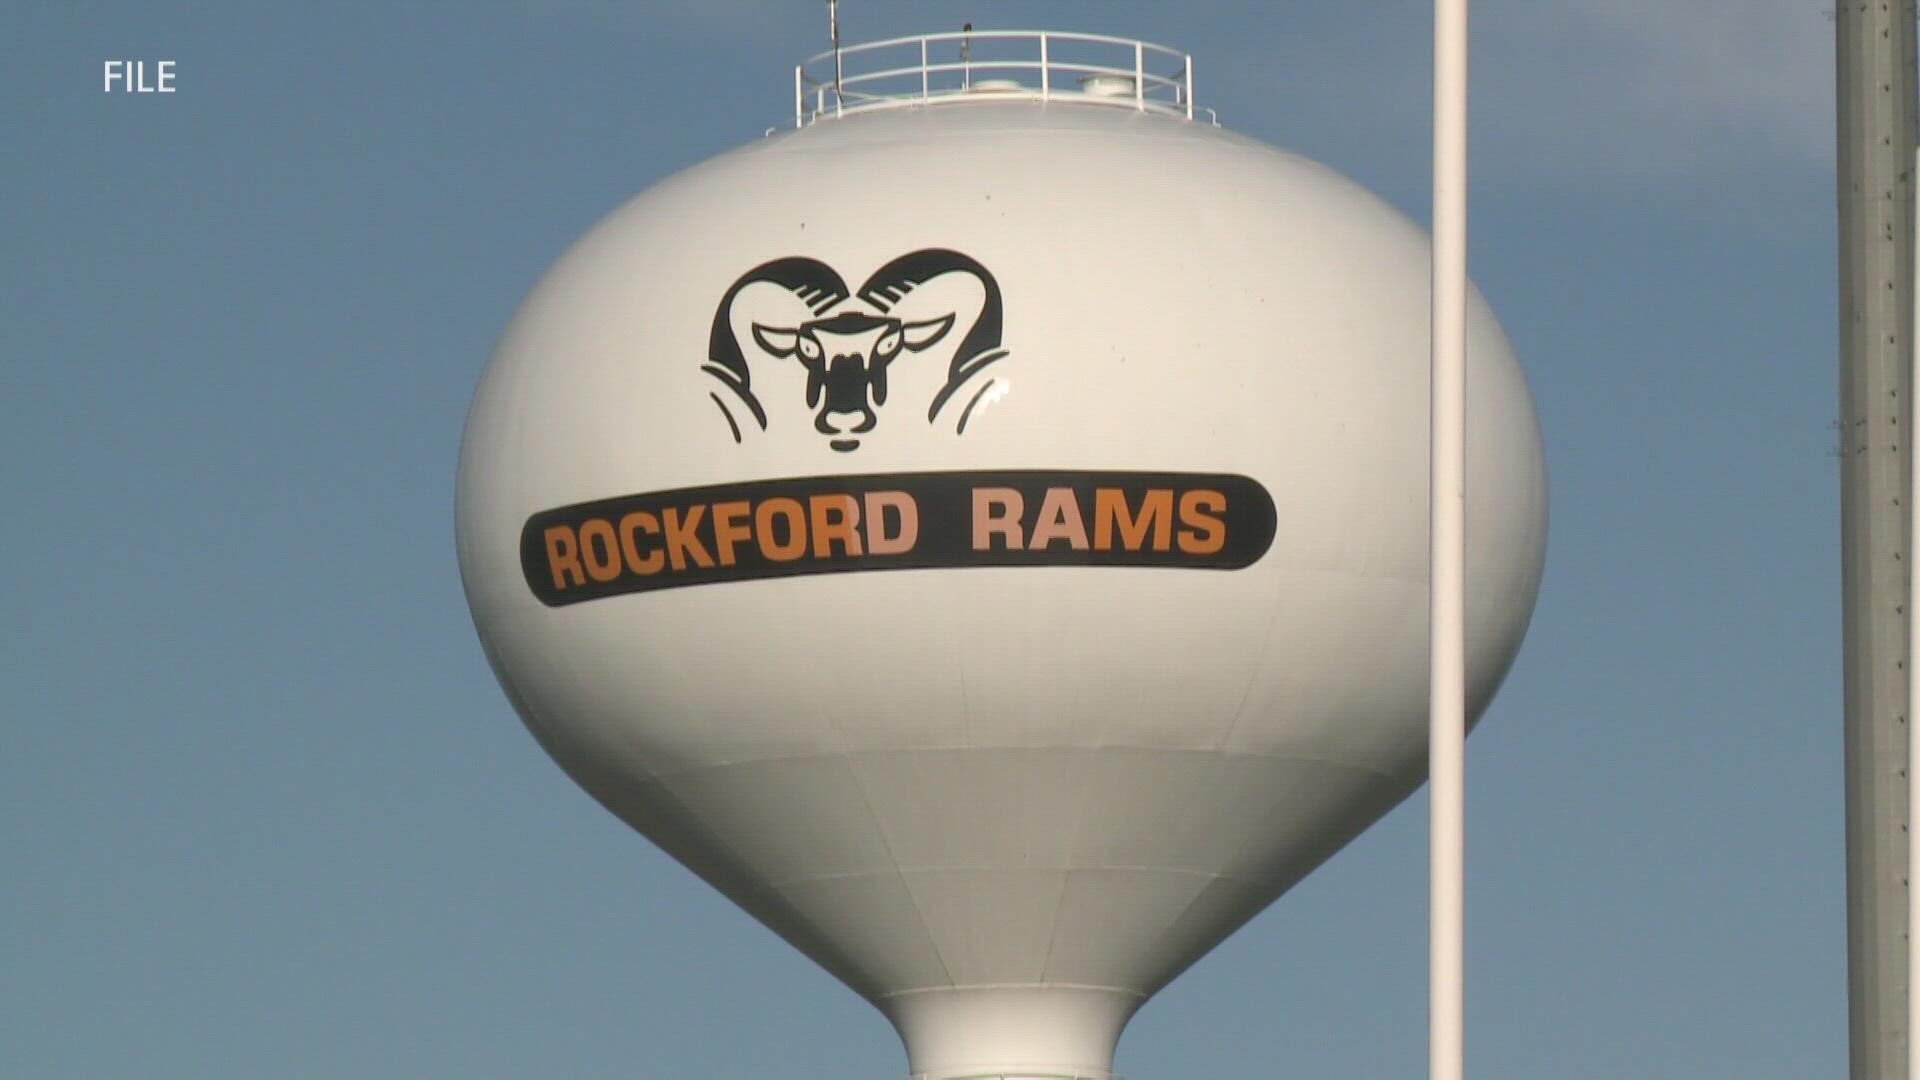 Rockford Virtual has about 100 7th-12th grade students enrolled in at least some online classes.